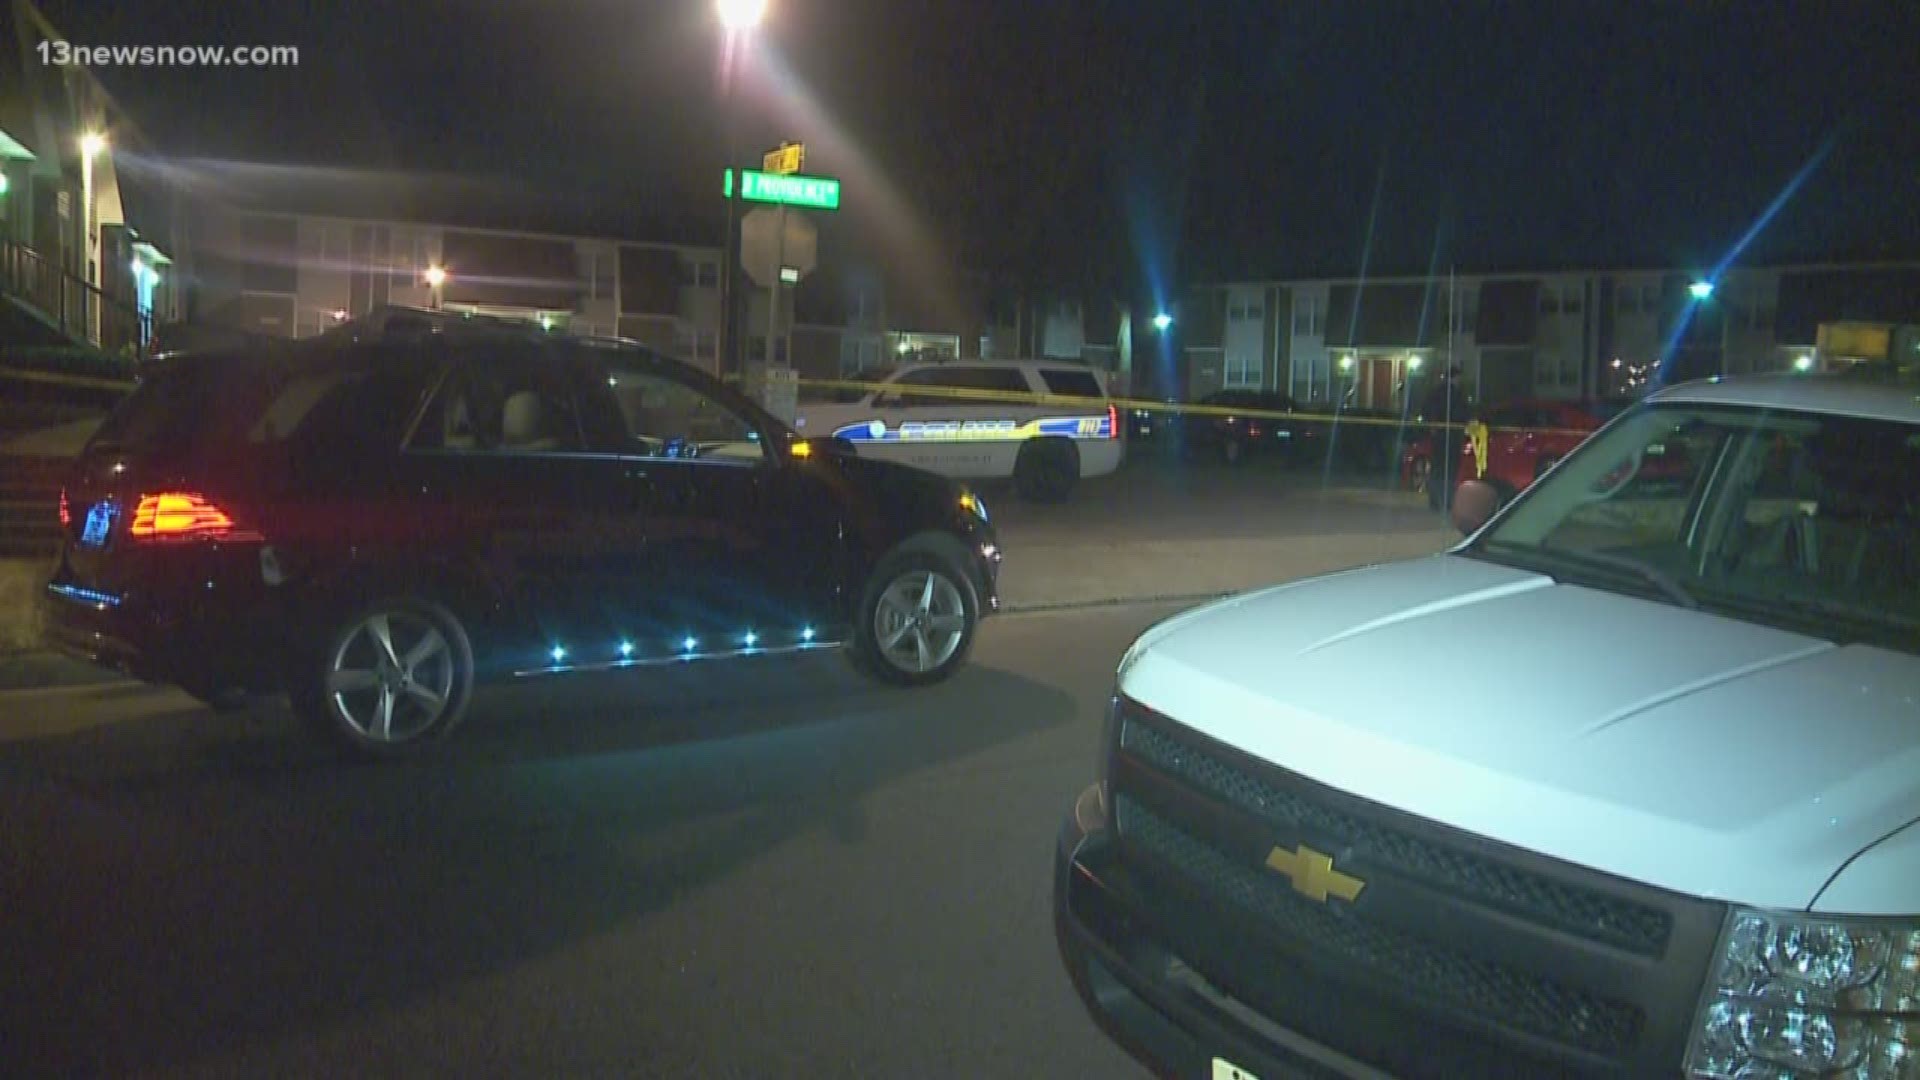 A man was shot and killed overnight in the Kempsville area of Virginia Beach.